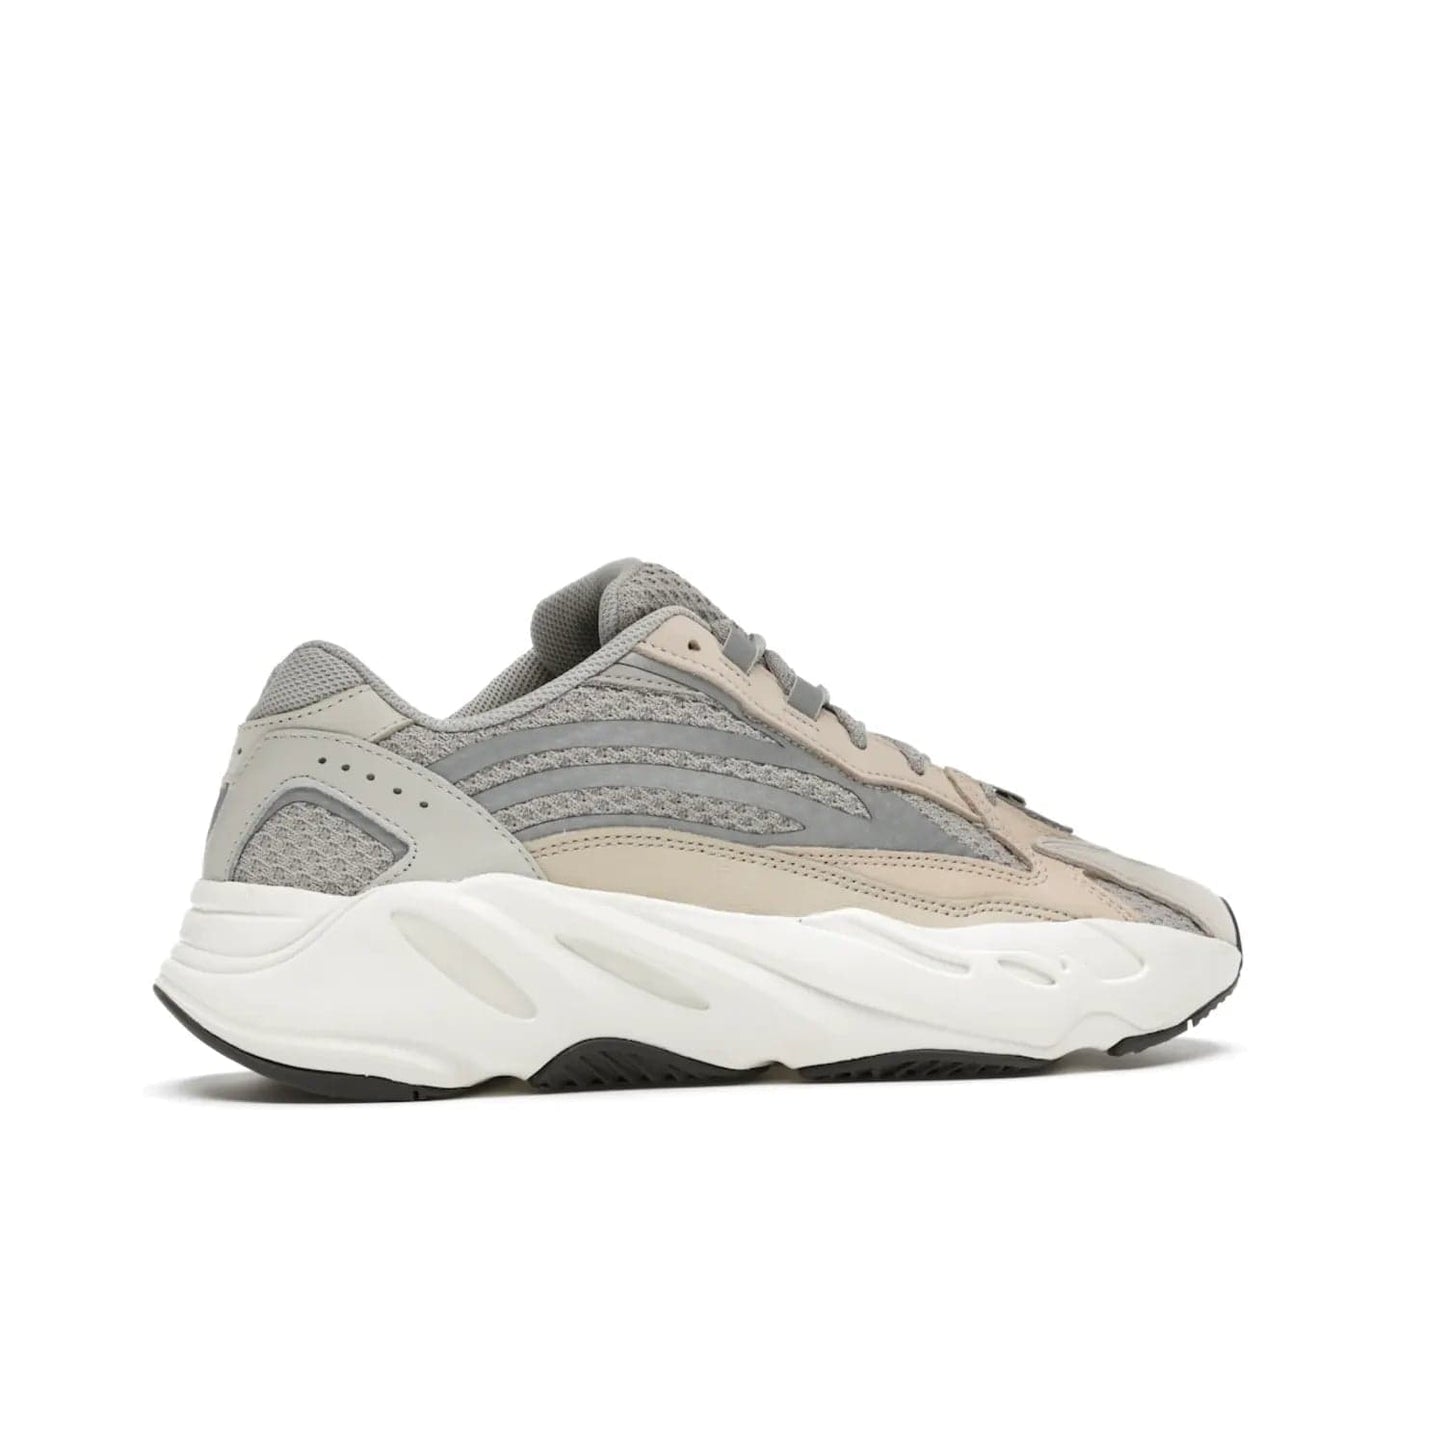 adidas Yeezy Boost 700 V2 Cream - Image 35 - Only at www.BallersClubKickz.com - Add style and luxury to your wardrobe with the adidas Yeezy 700 V2 Cream. Featuring a unique reflective upper, leather overlays, mesh underlays and the signature BOOST midsole, this silhouette is perfect for any stylish wardrobe.